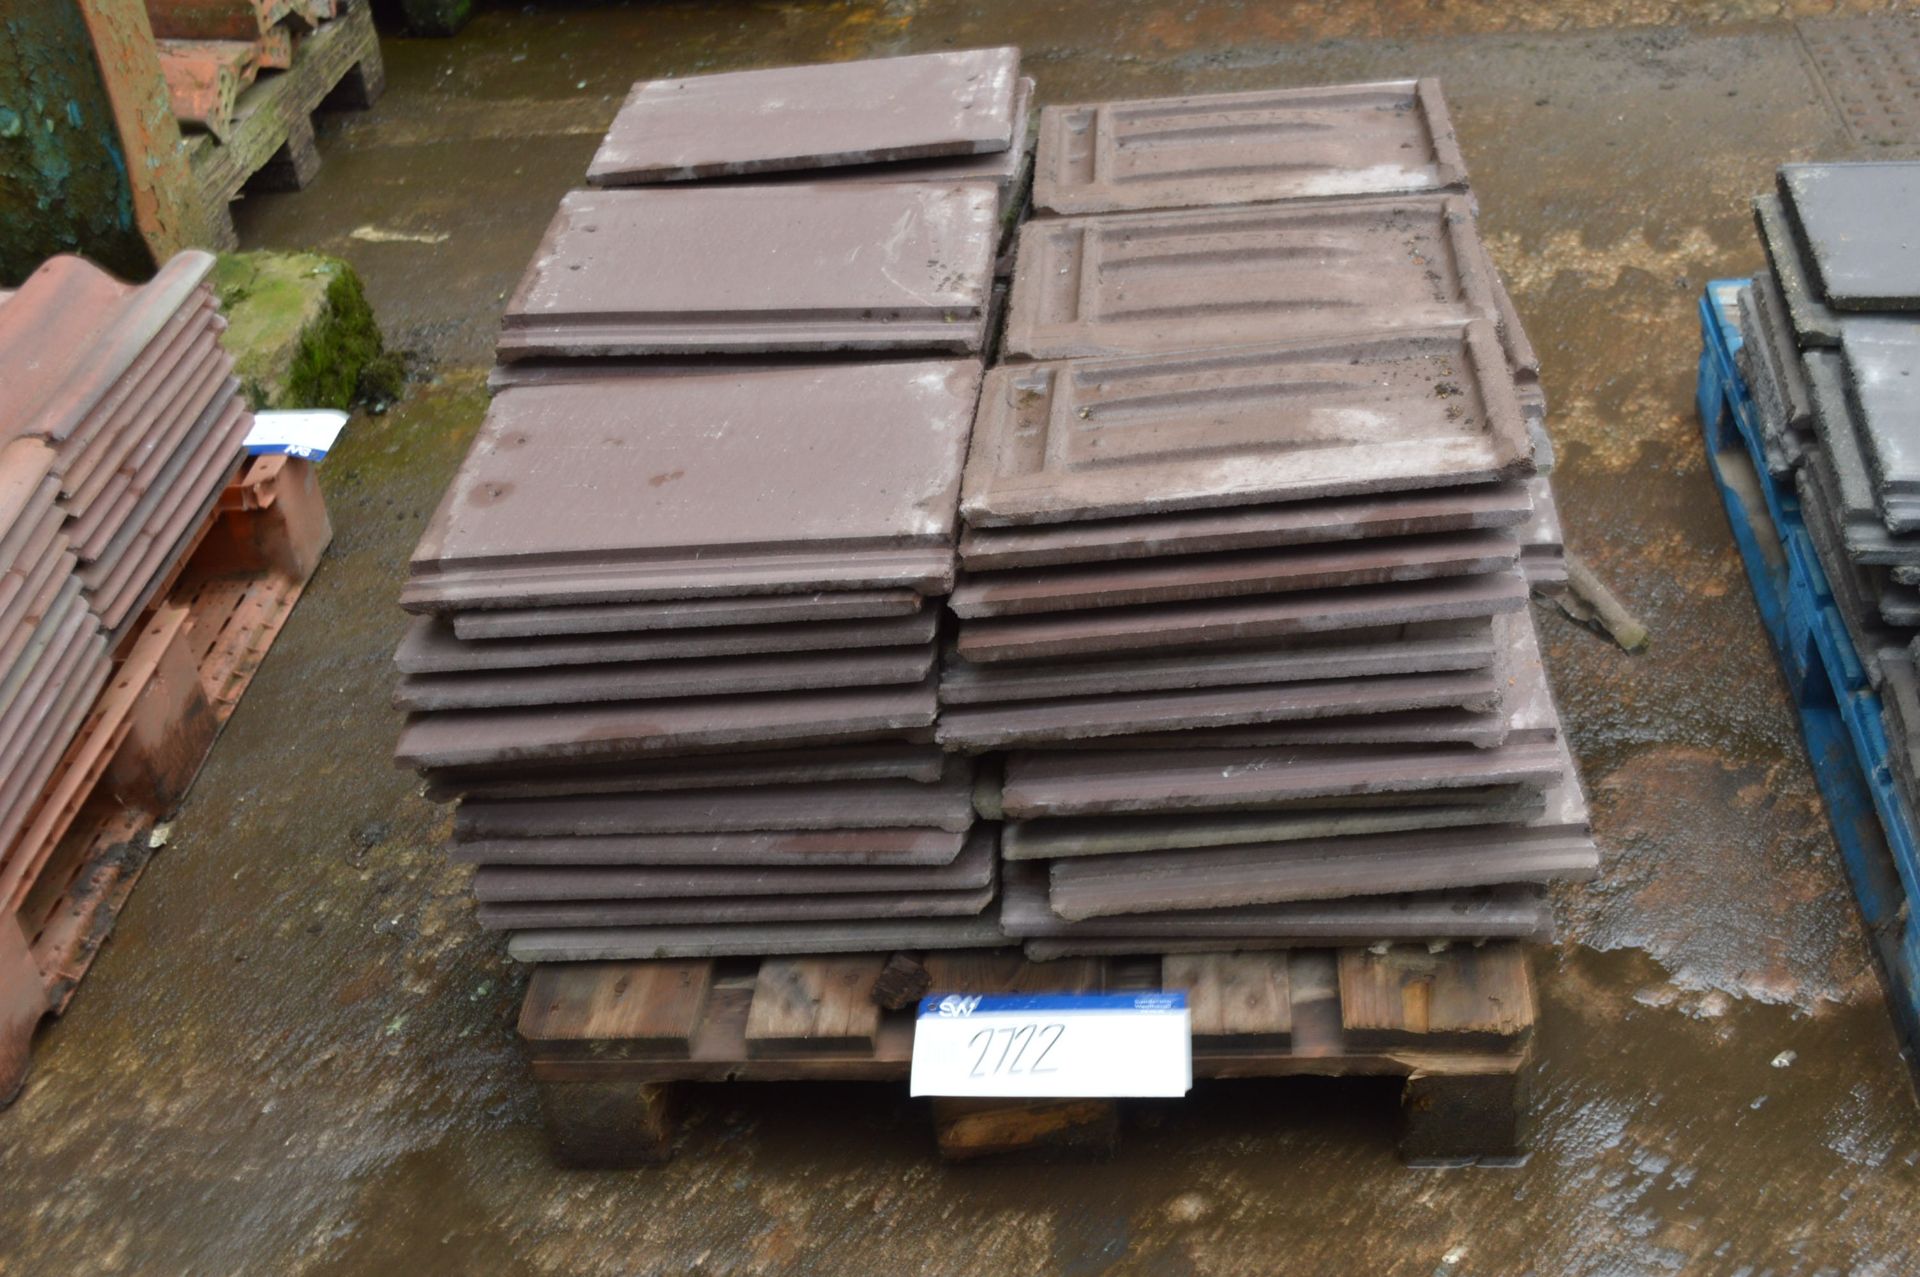 Roof Tiles, as set out on pallet